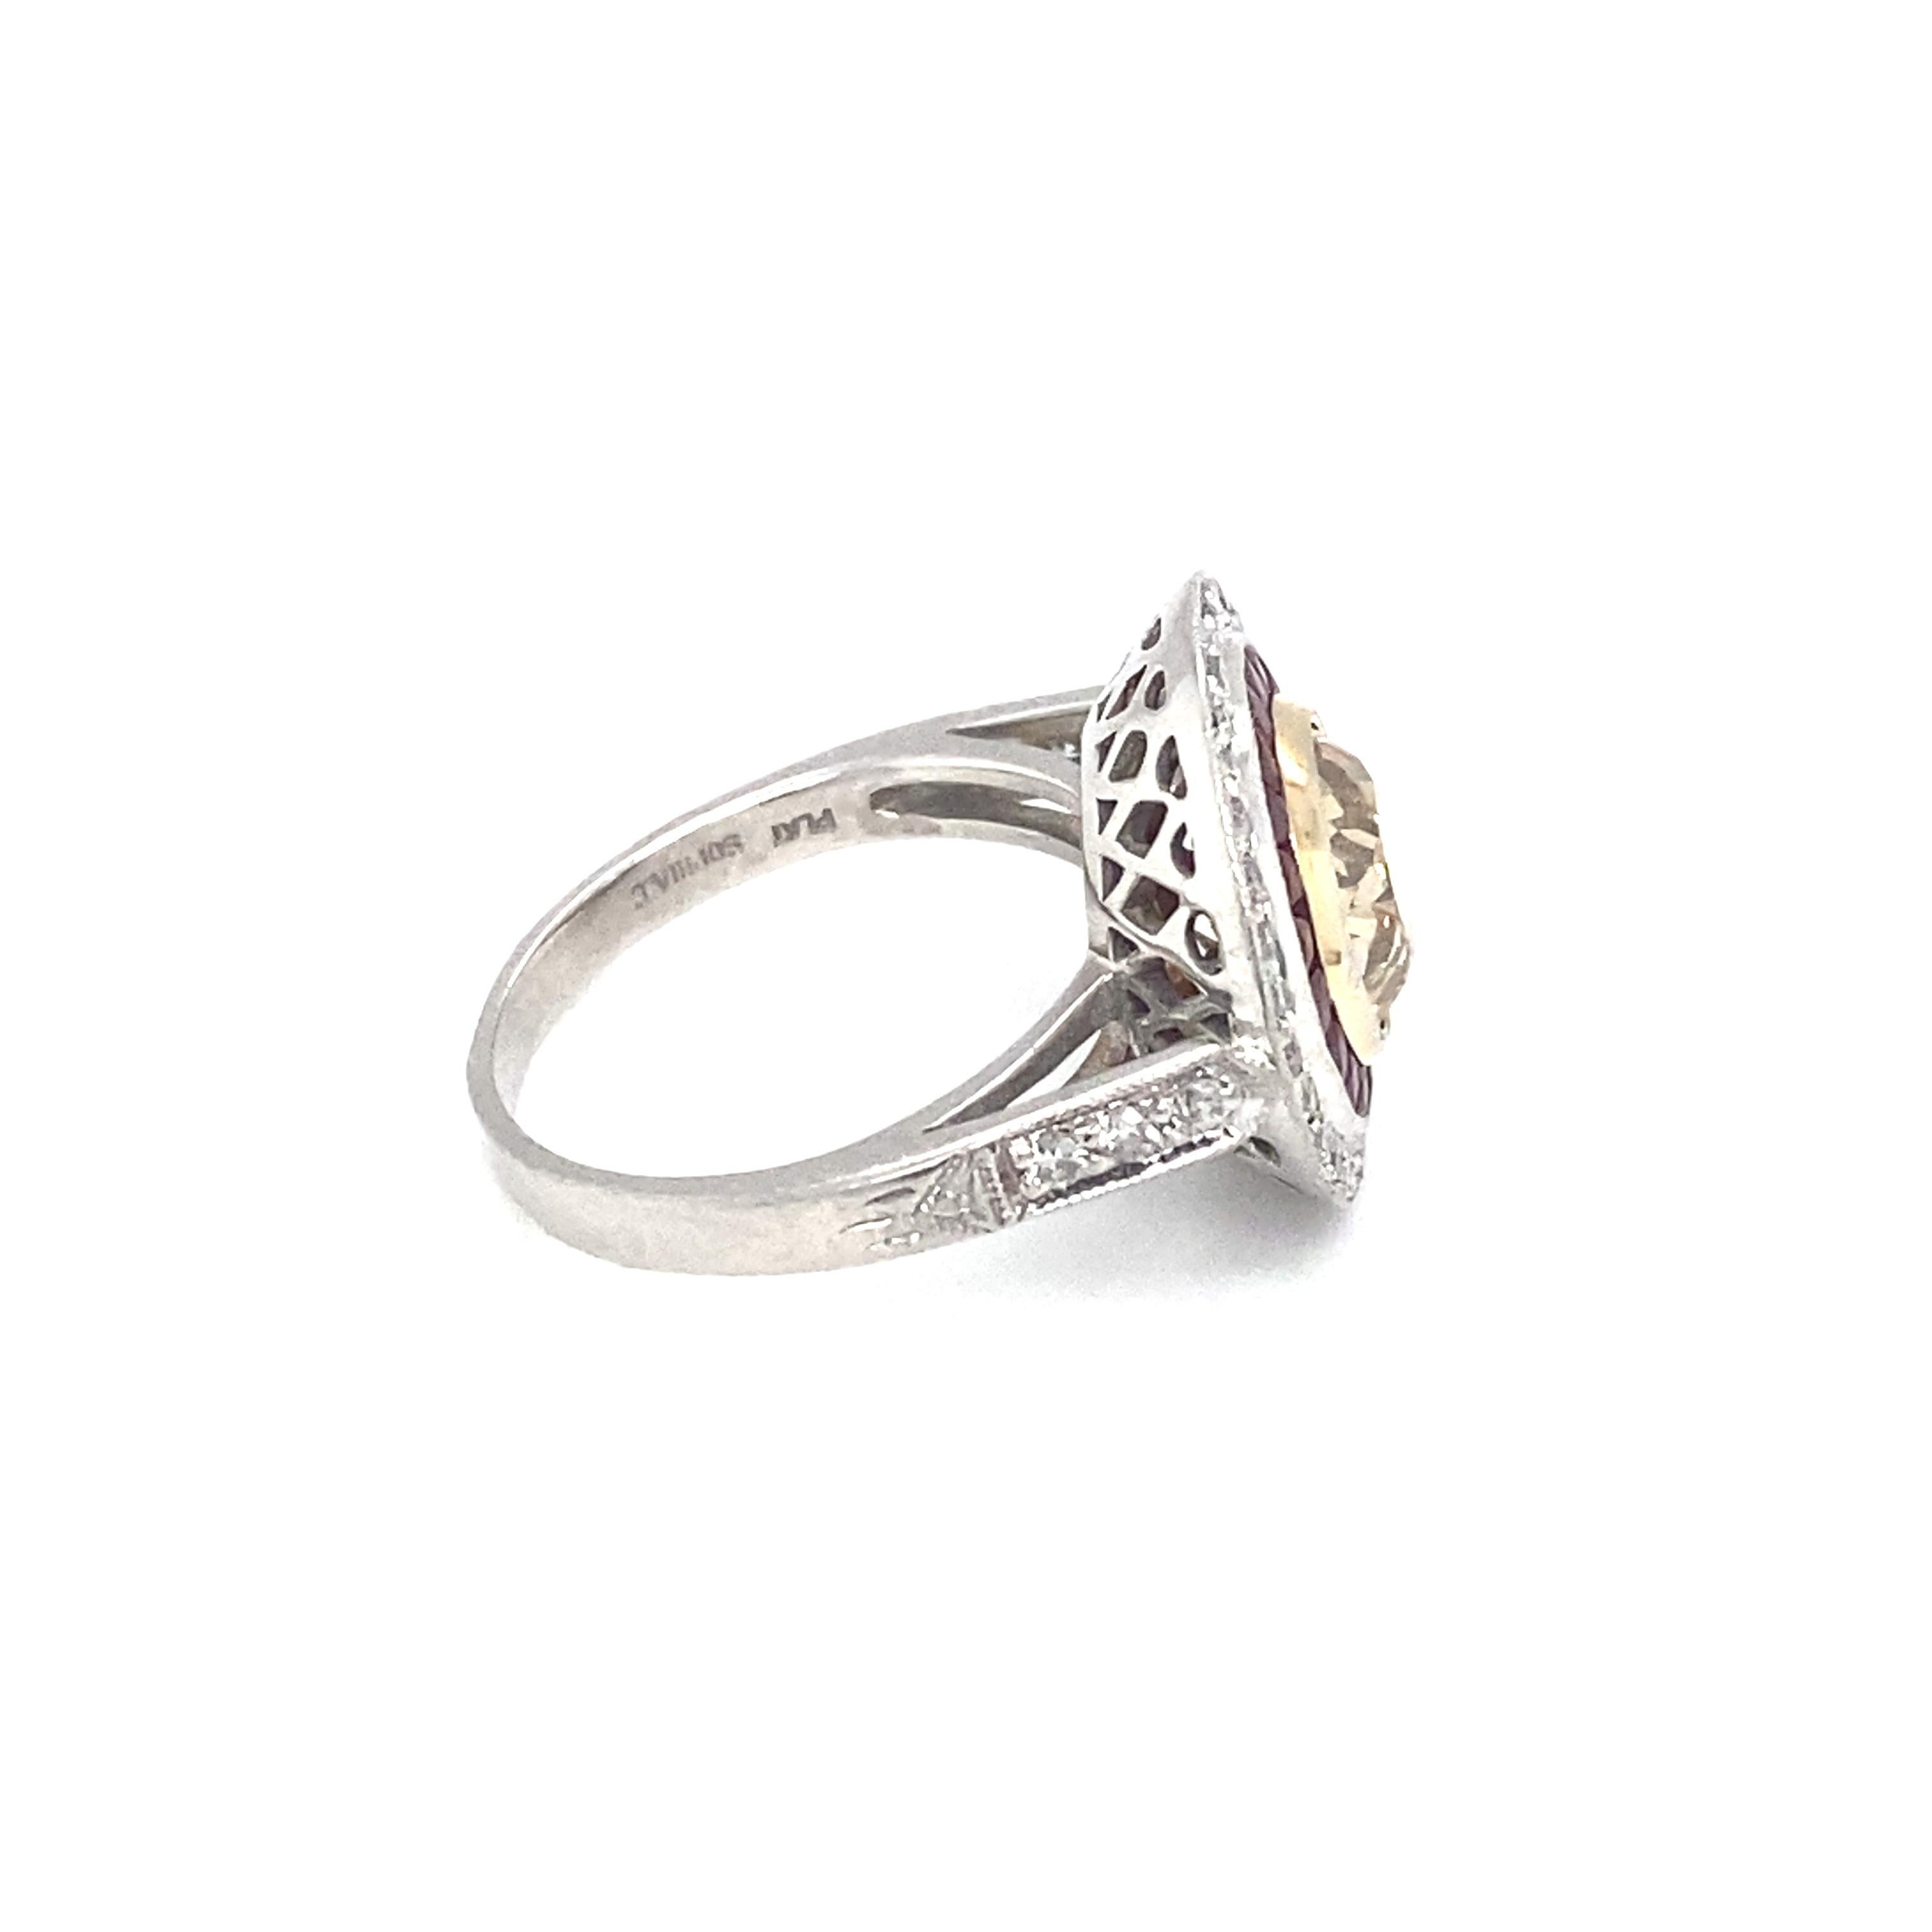 Item Details: This Art Deco style ring has a center GIA certified brown diamond with accent colorless diamonds and rubies. It's a beautiful piece for any vintage loving bride! Signed Sophia D.

Circa: 2000s
Metal Type: Platinum
Weight: 8.3g
Size: US